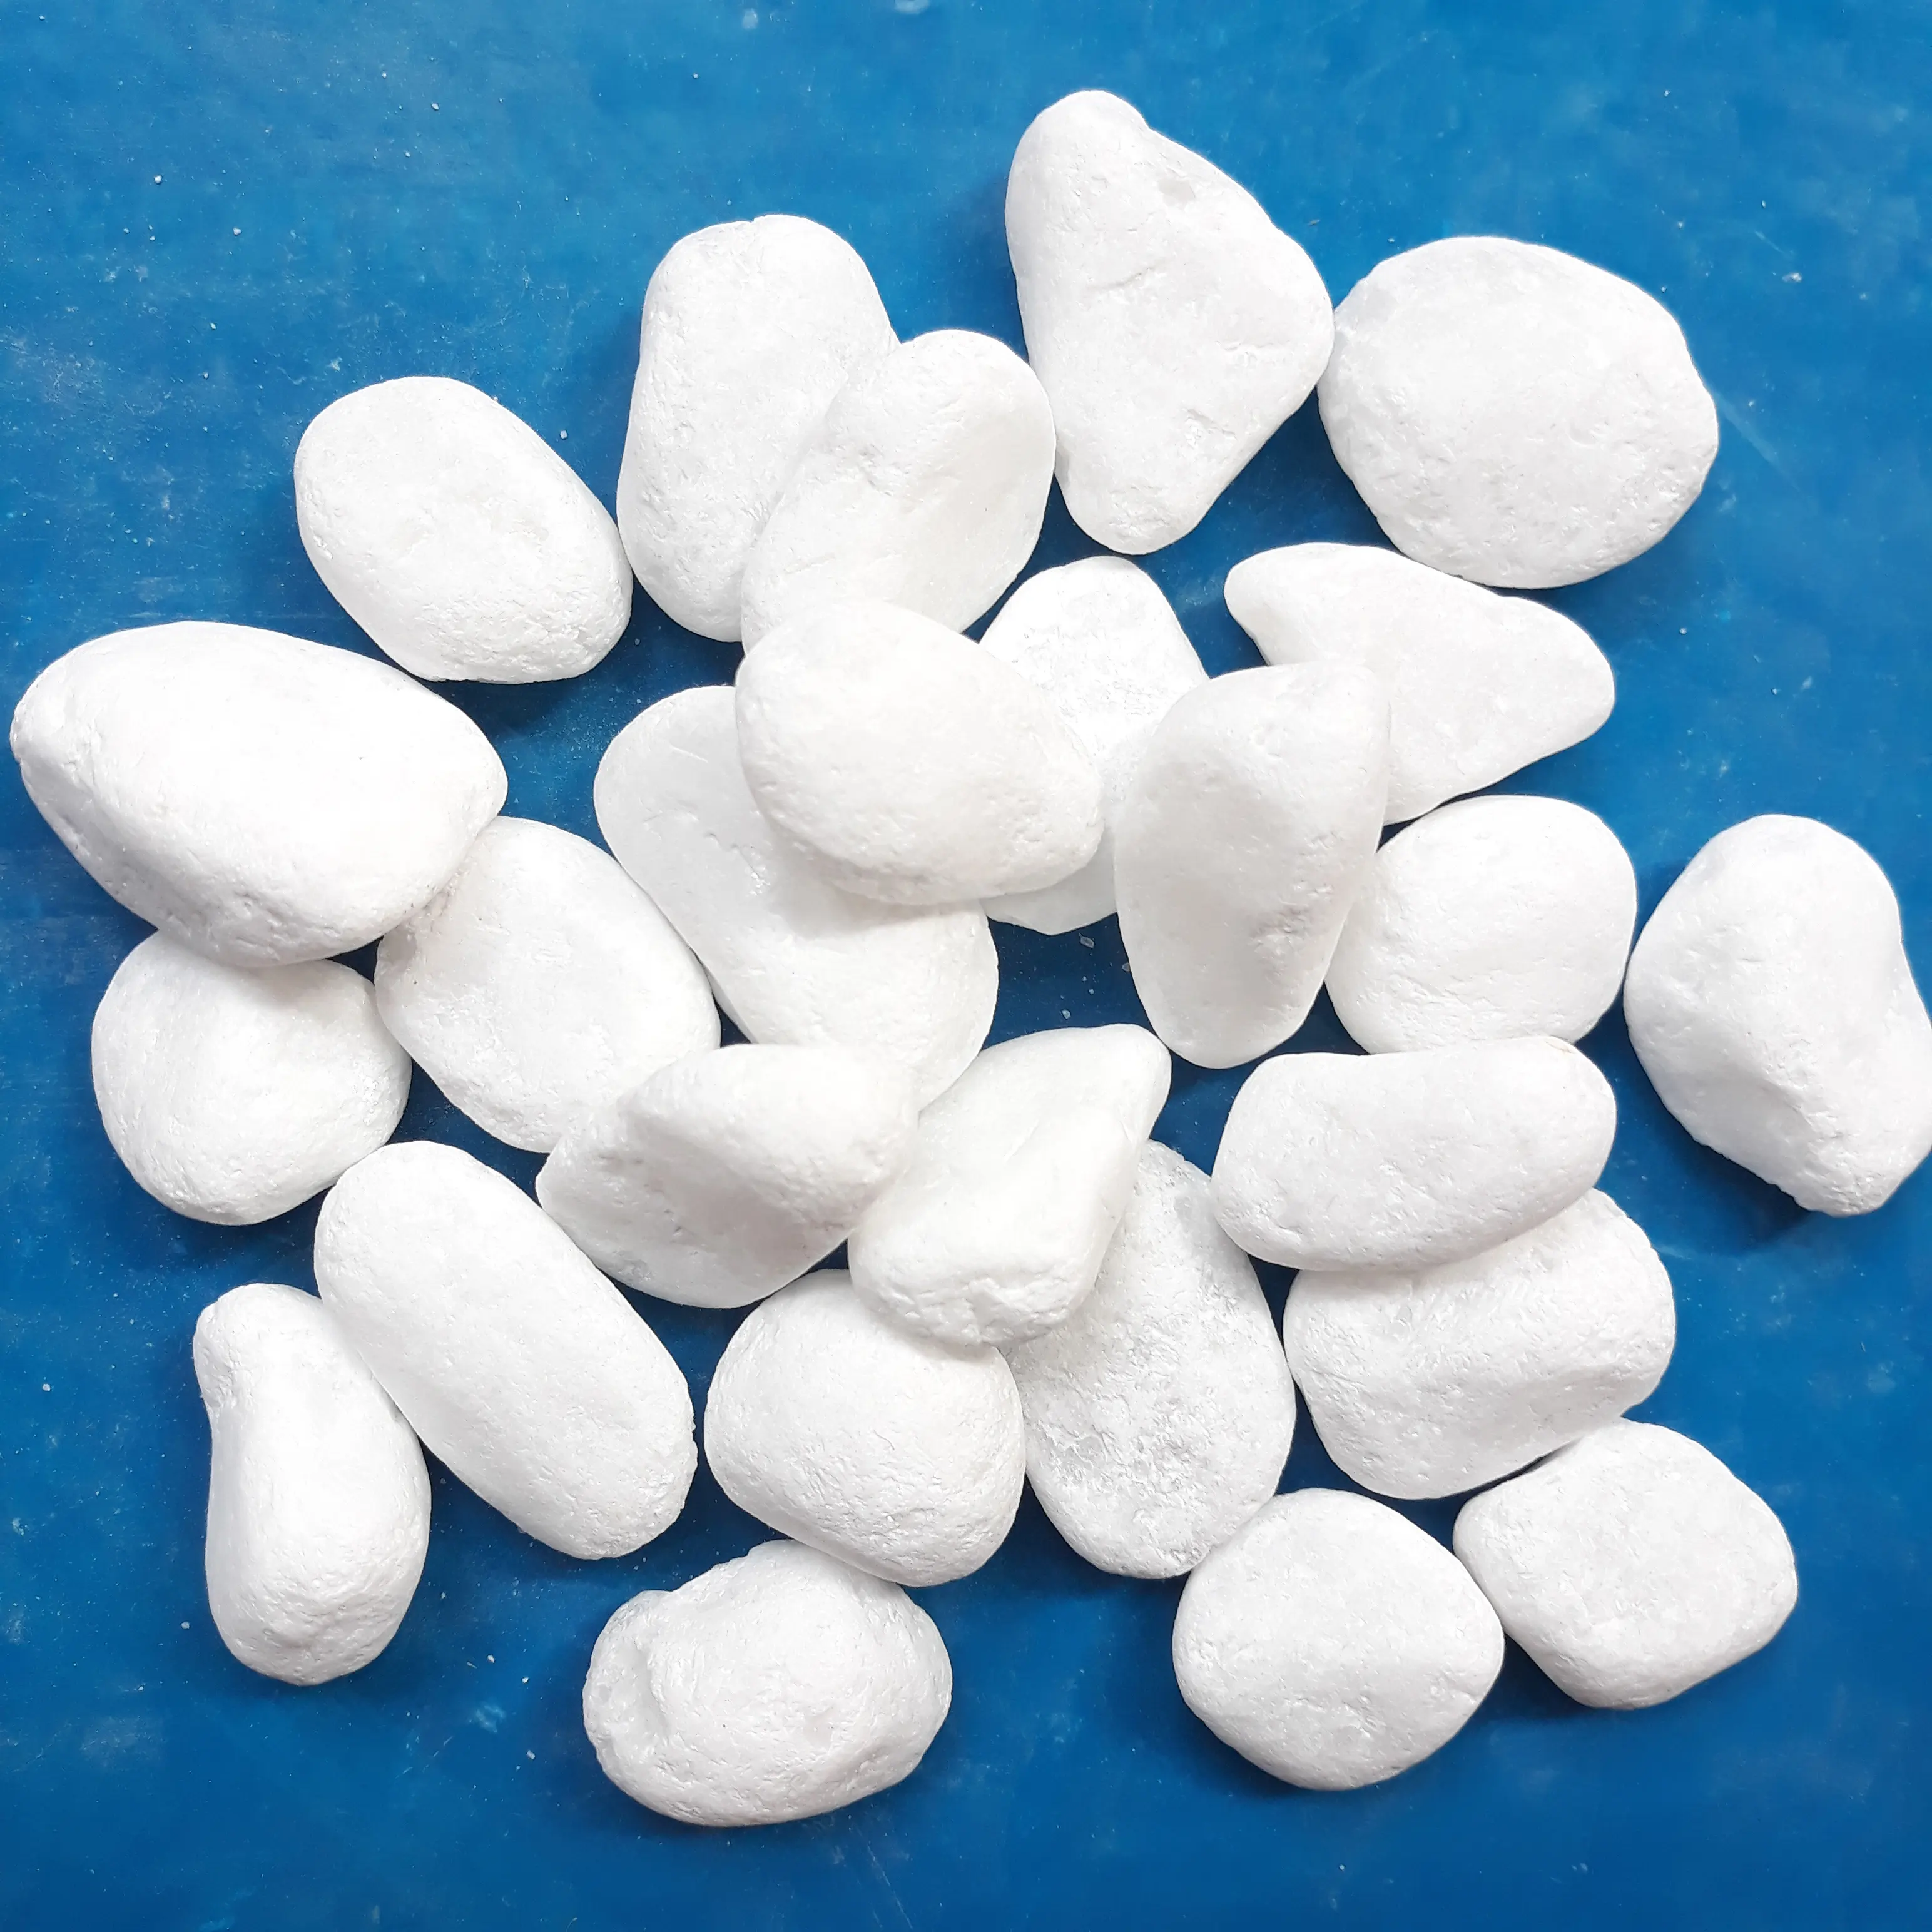 White Pebbles Chipping Stone for Pathway Paving Garden Landscape Surface Coating Pebble Mosaic Completely